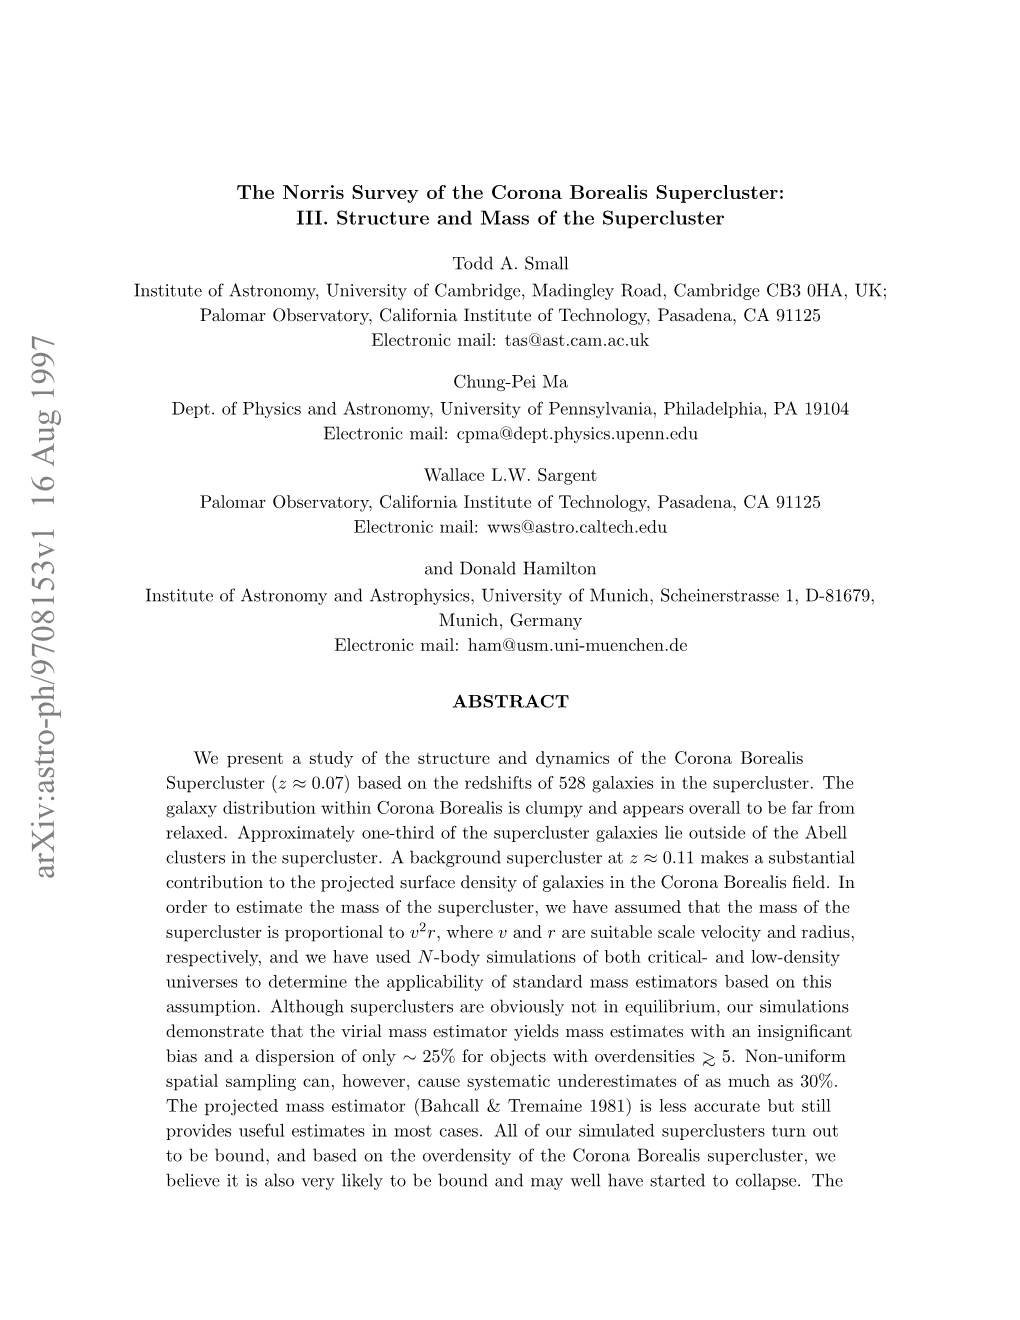 The Norris Survey of the Corona Borealis Supercluster: III. Structure